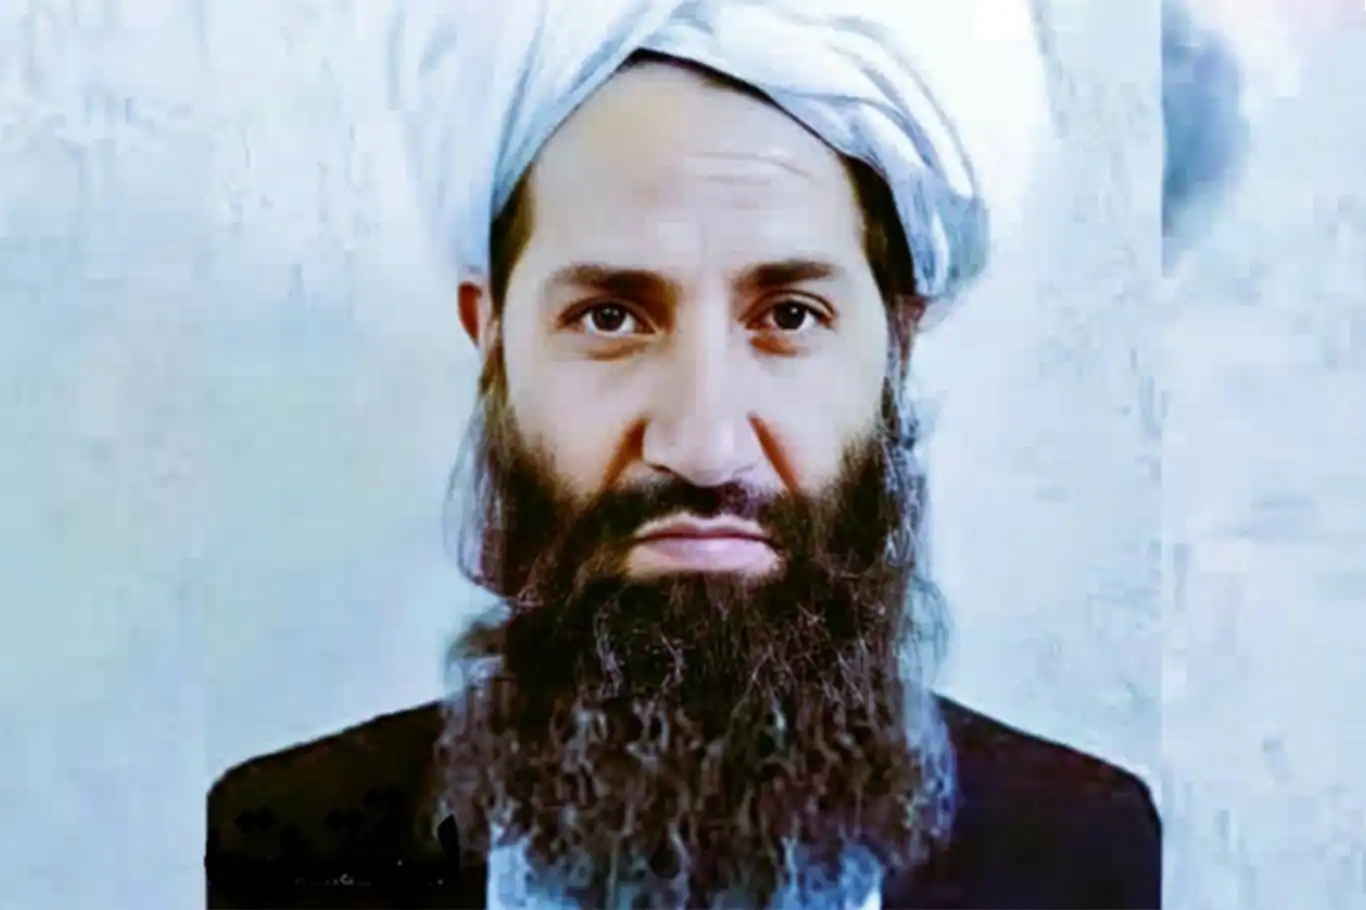 Afghanistan: Sheikh Hibatullah affirms uncompromising stance on Sharia law